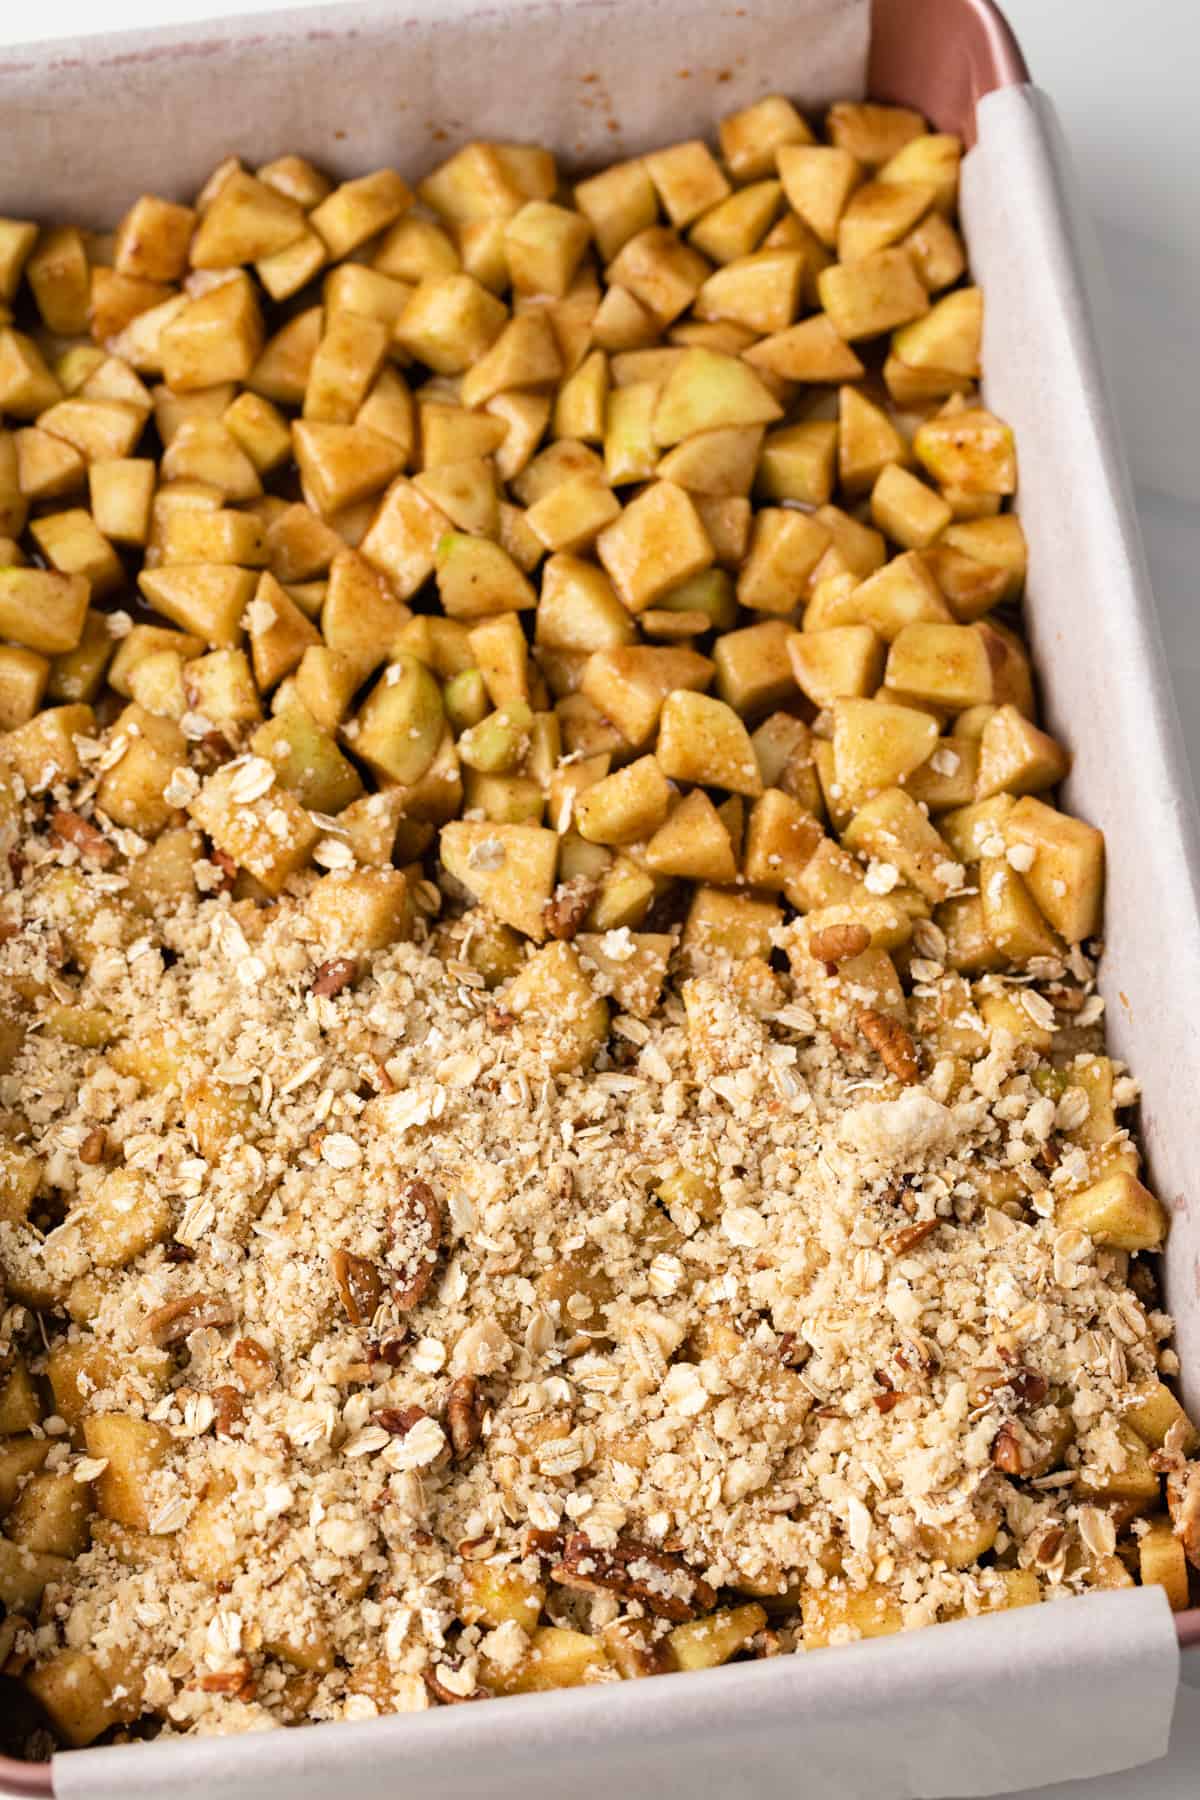 Streusel topping being layered over cinnamon apples